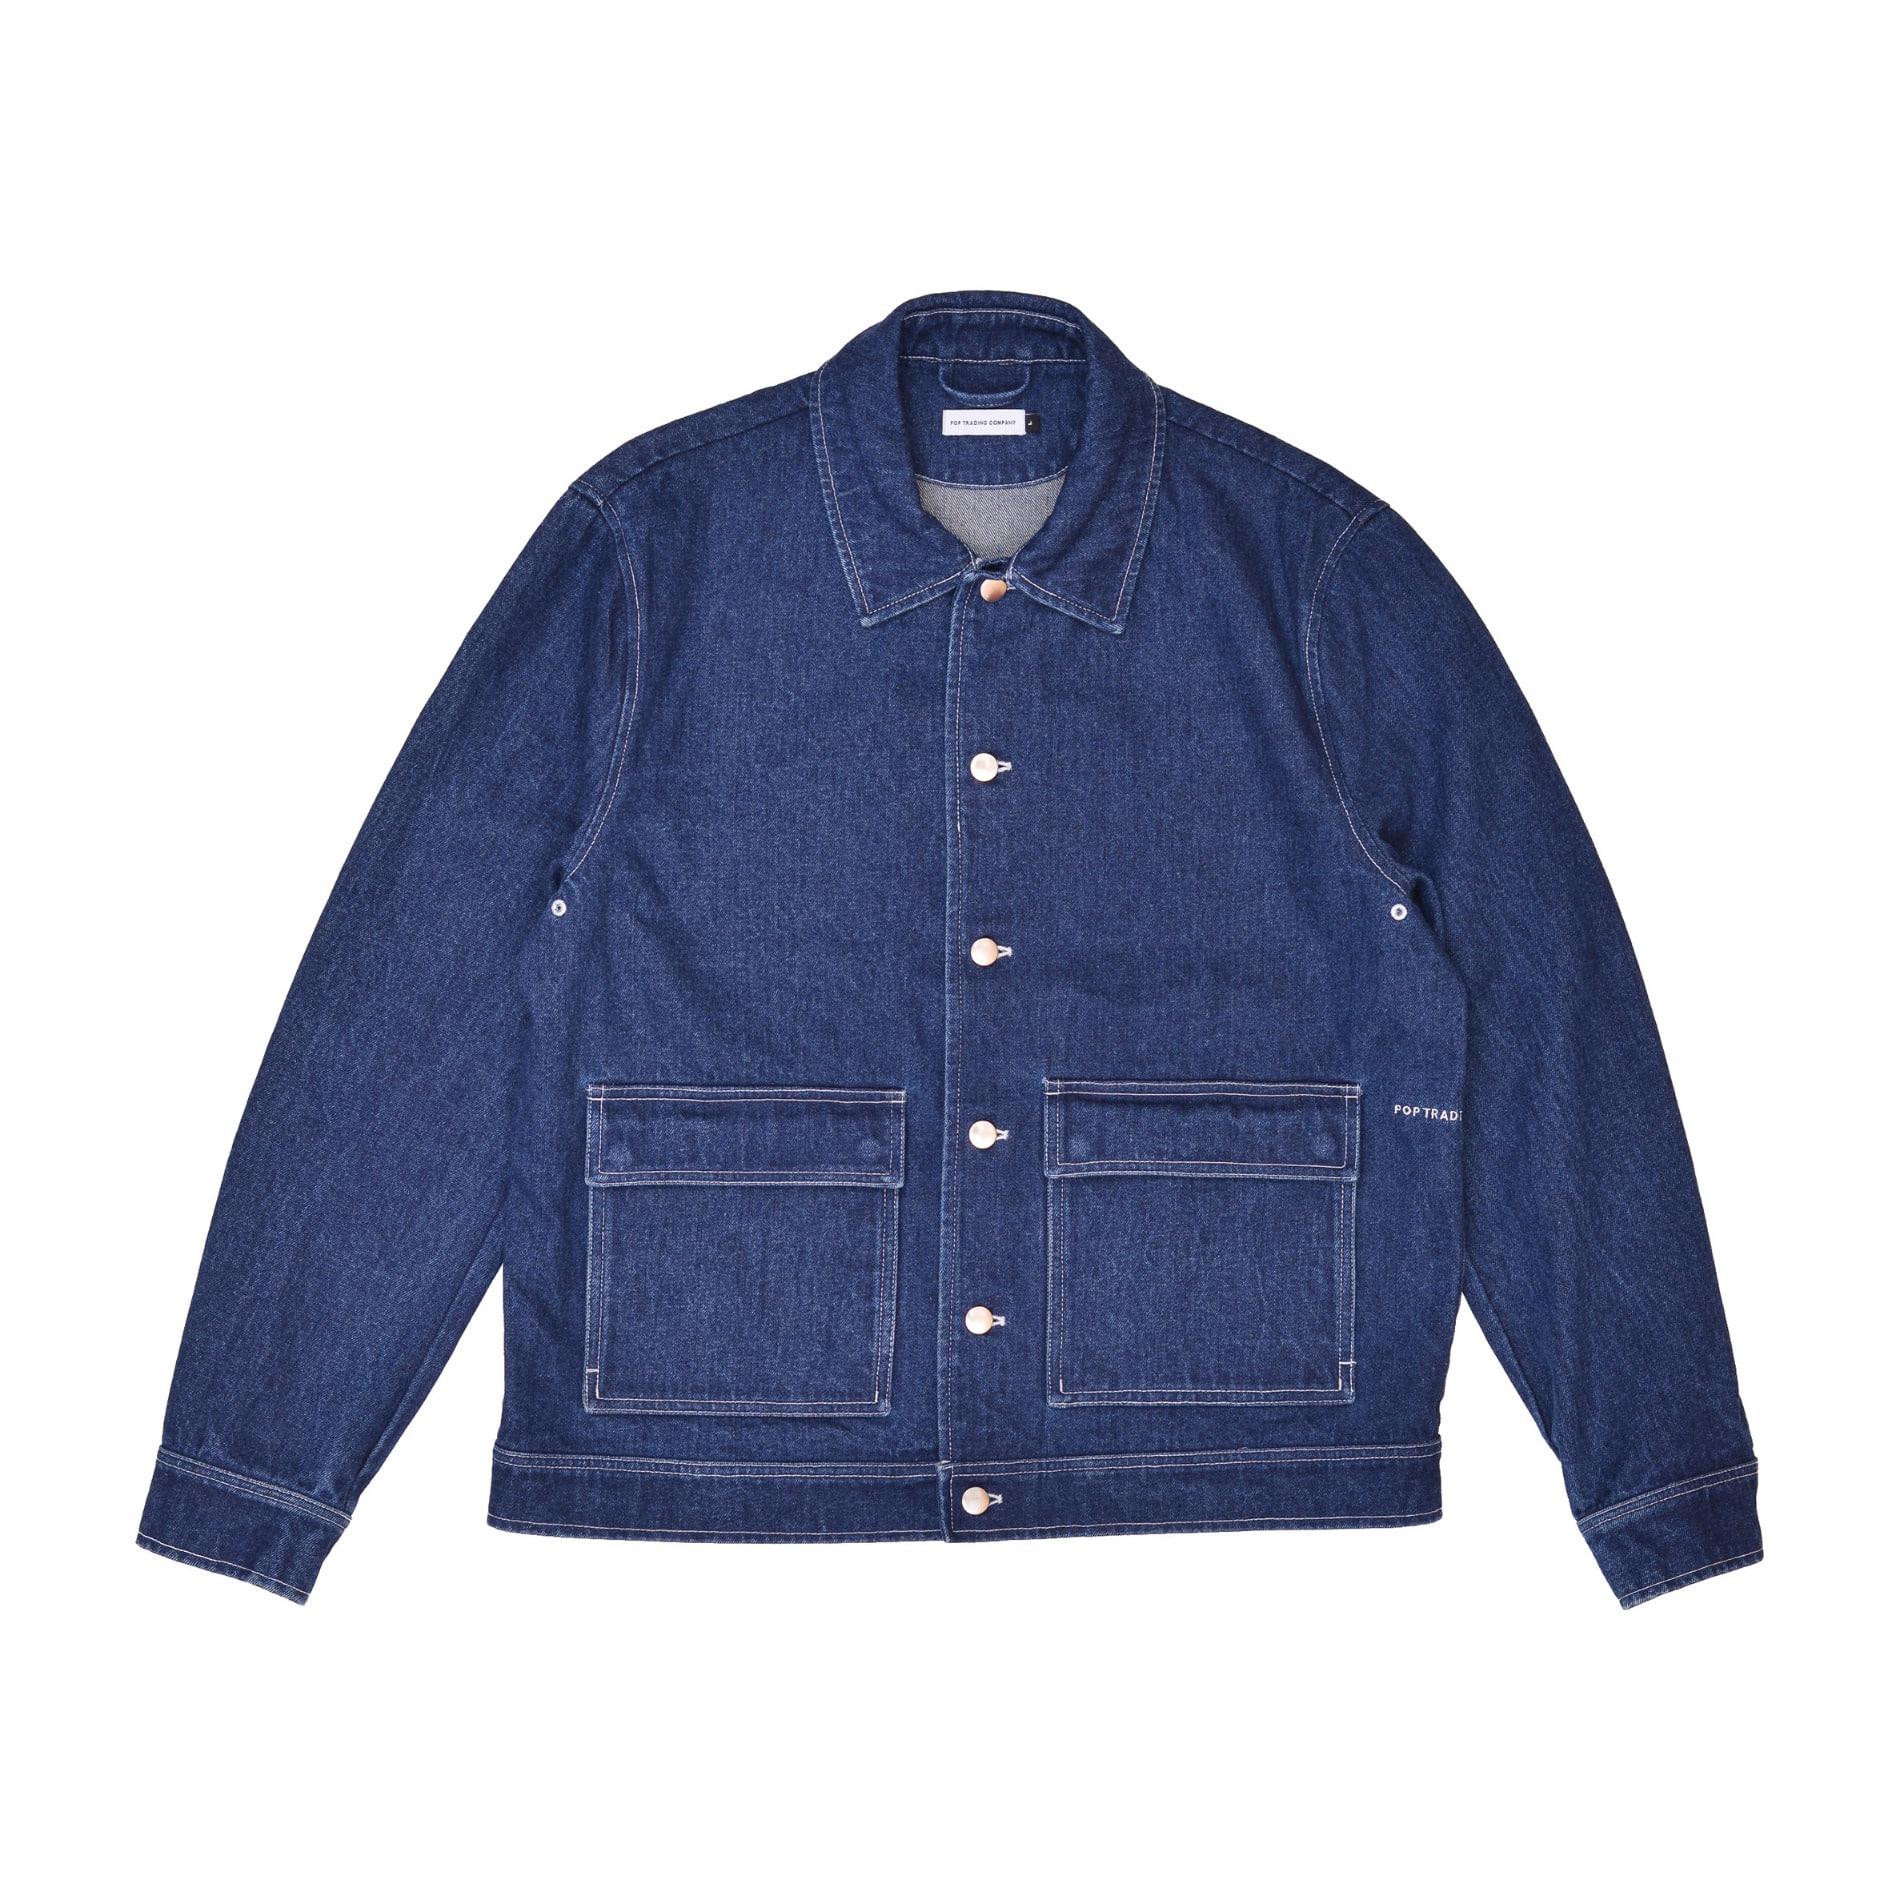 SS22 POP TRADING COMPANY FULL BUTTON JACKET RINSED DENIM